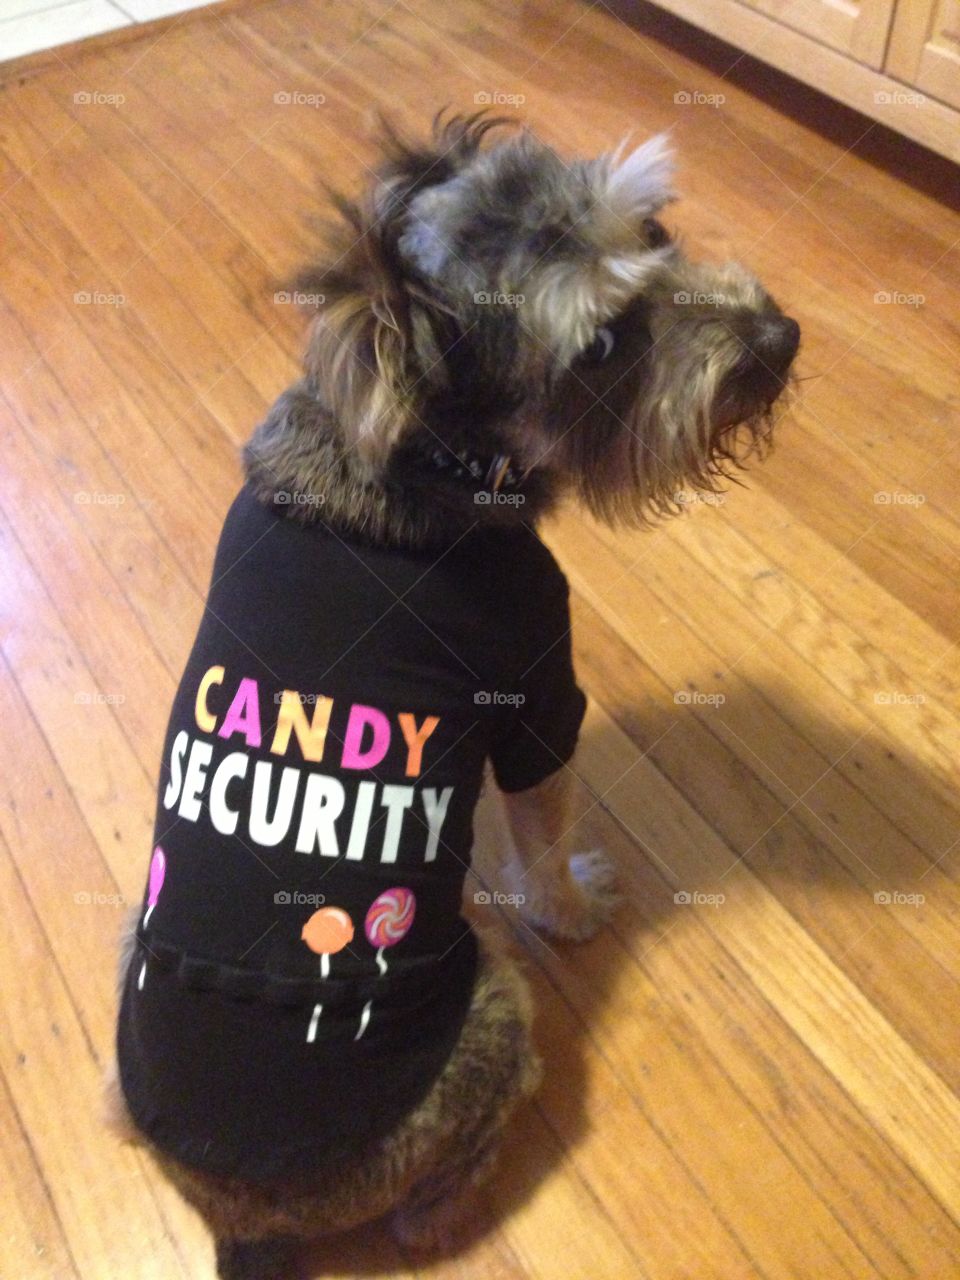 The fun police: Candy security pup